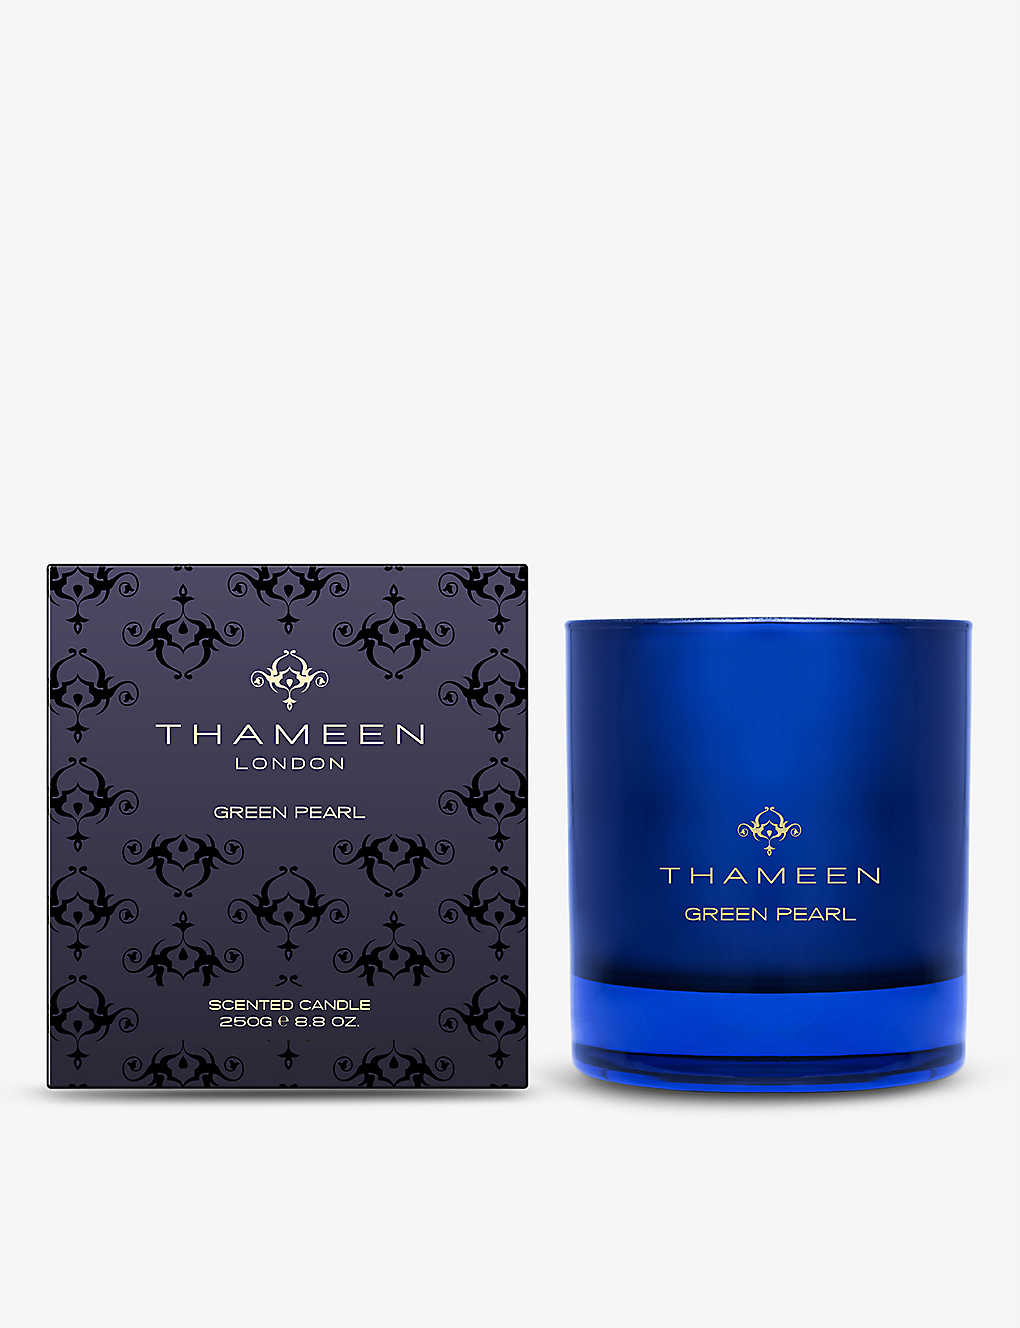 Thameen Green Pearl Limited-edition Scented Candle 250g